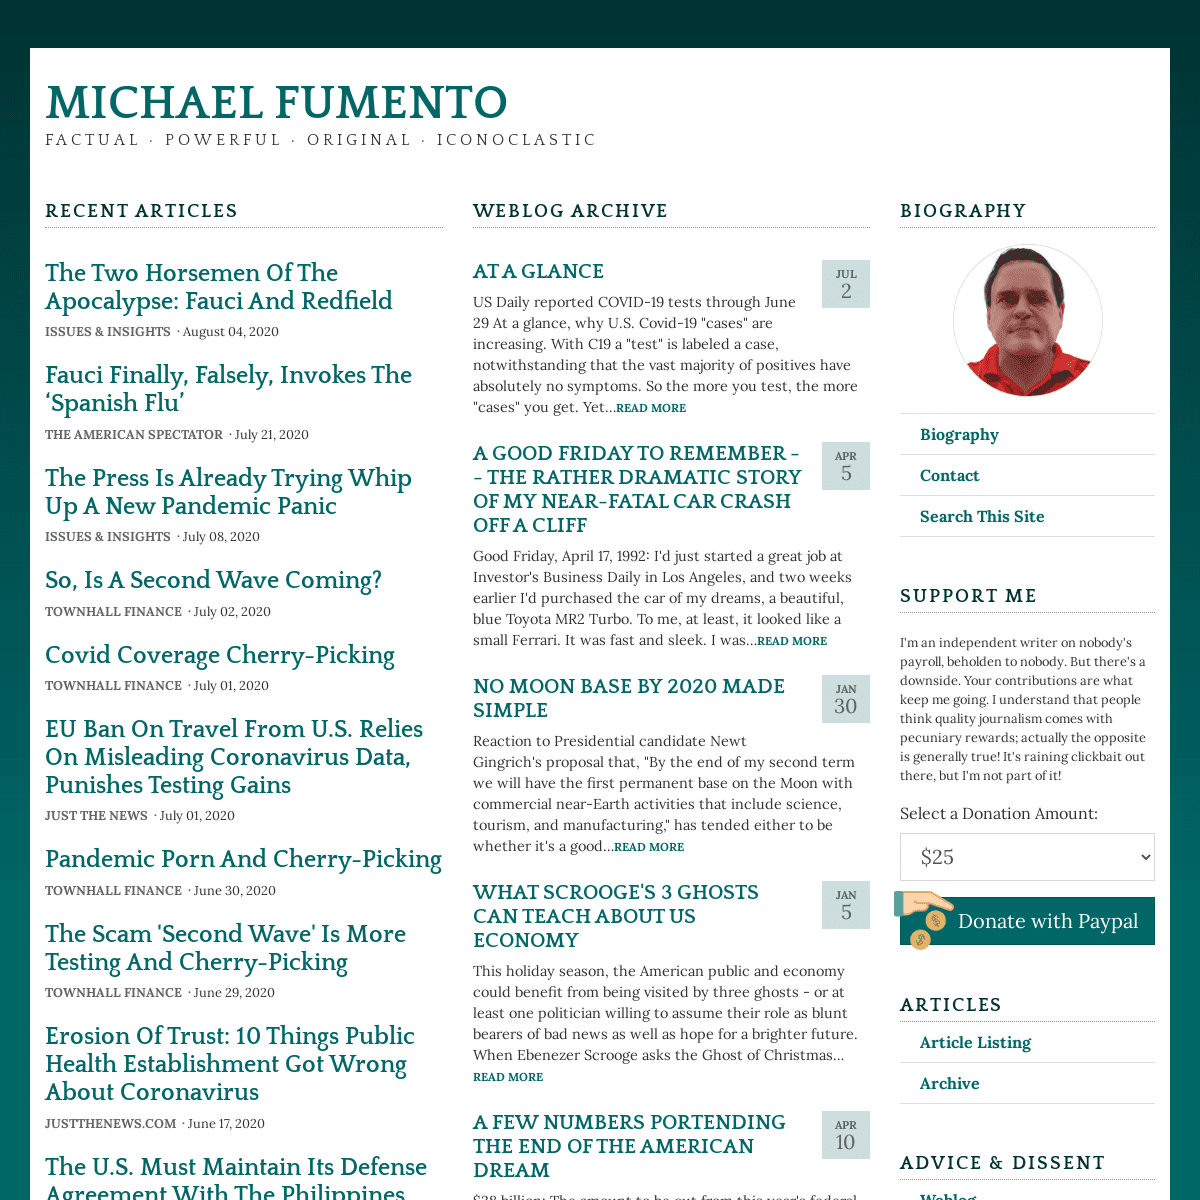 A complete backup of https://fumento.com